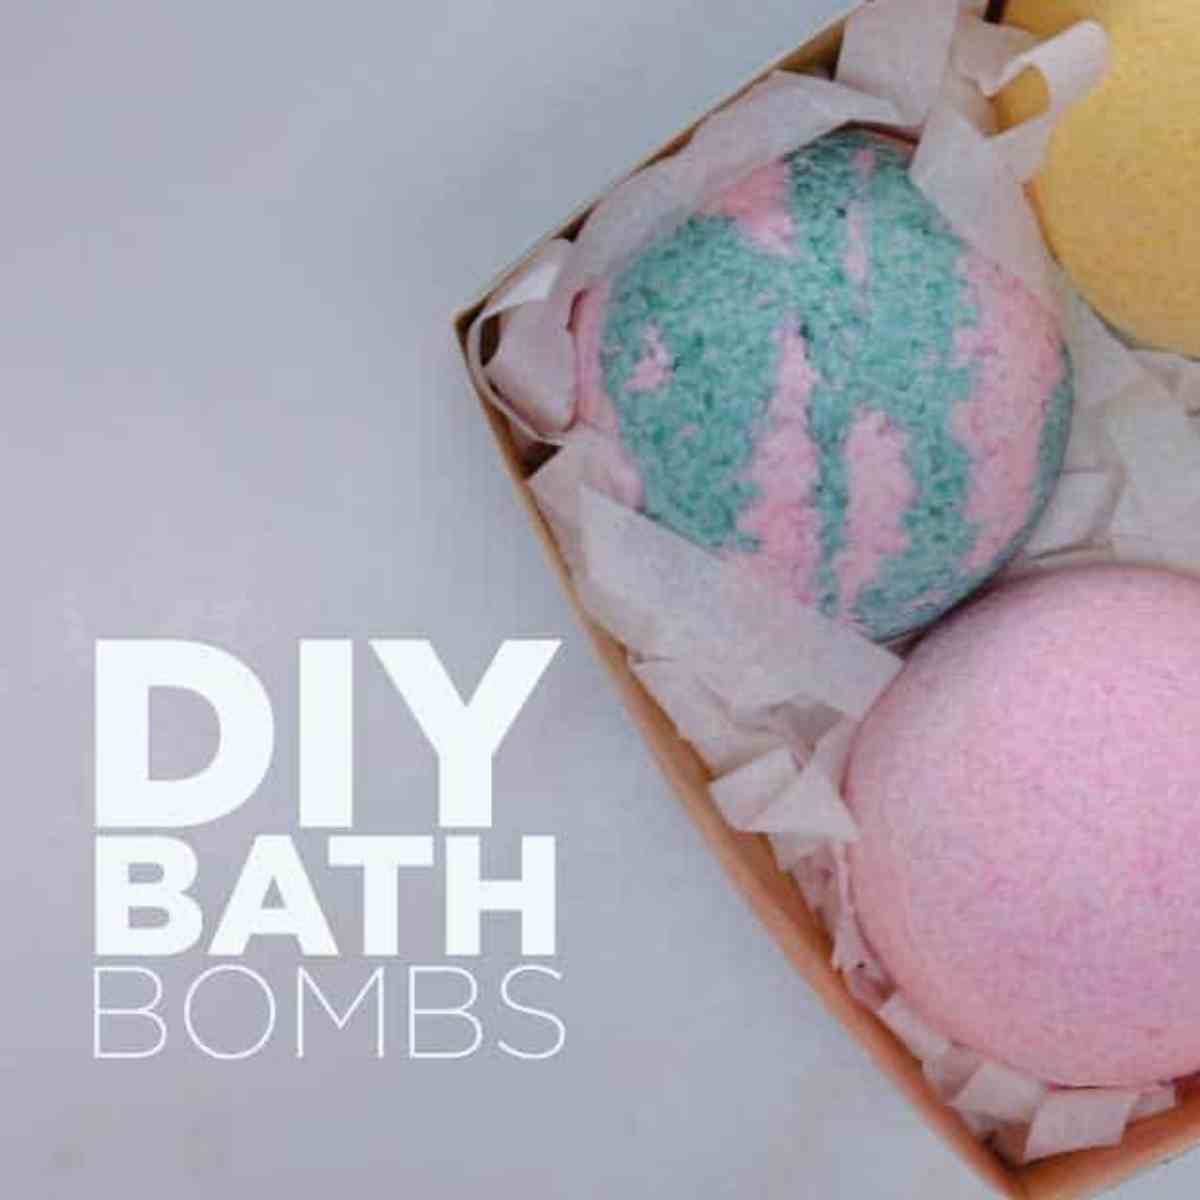 DIY Bath Bombs | DIY Bath Bombs For A More Bubbly and Lively Bath Experience 